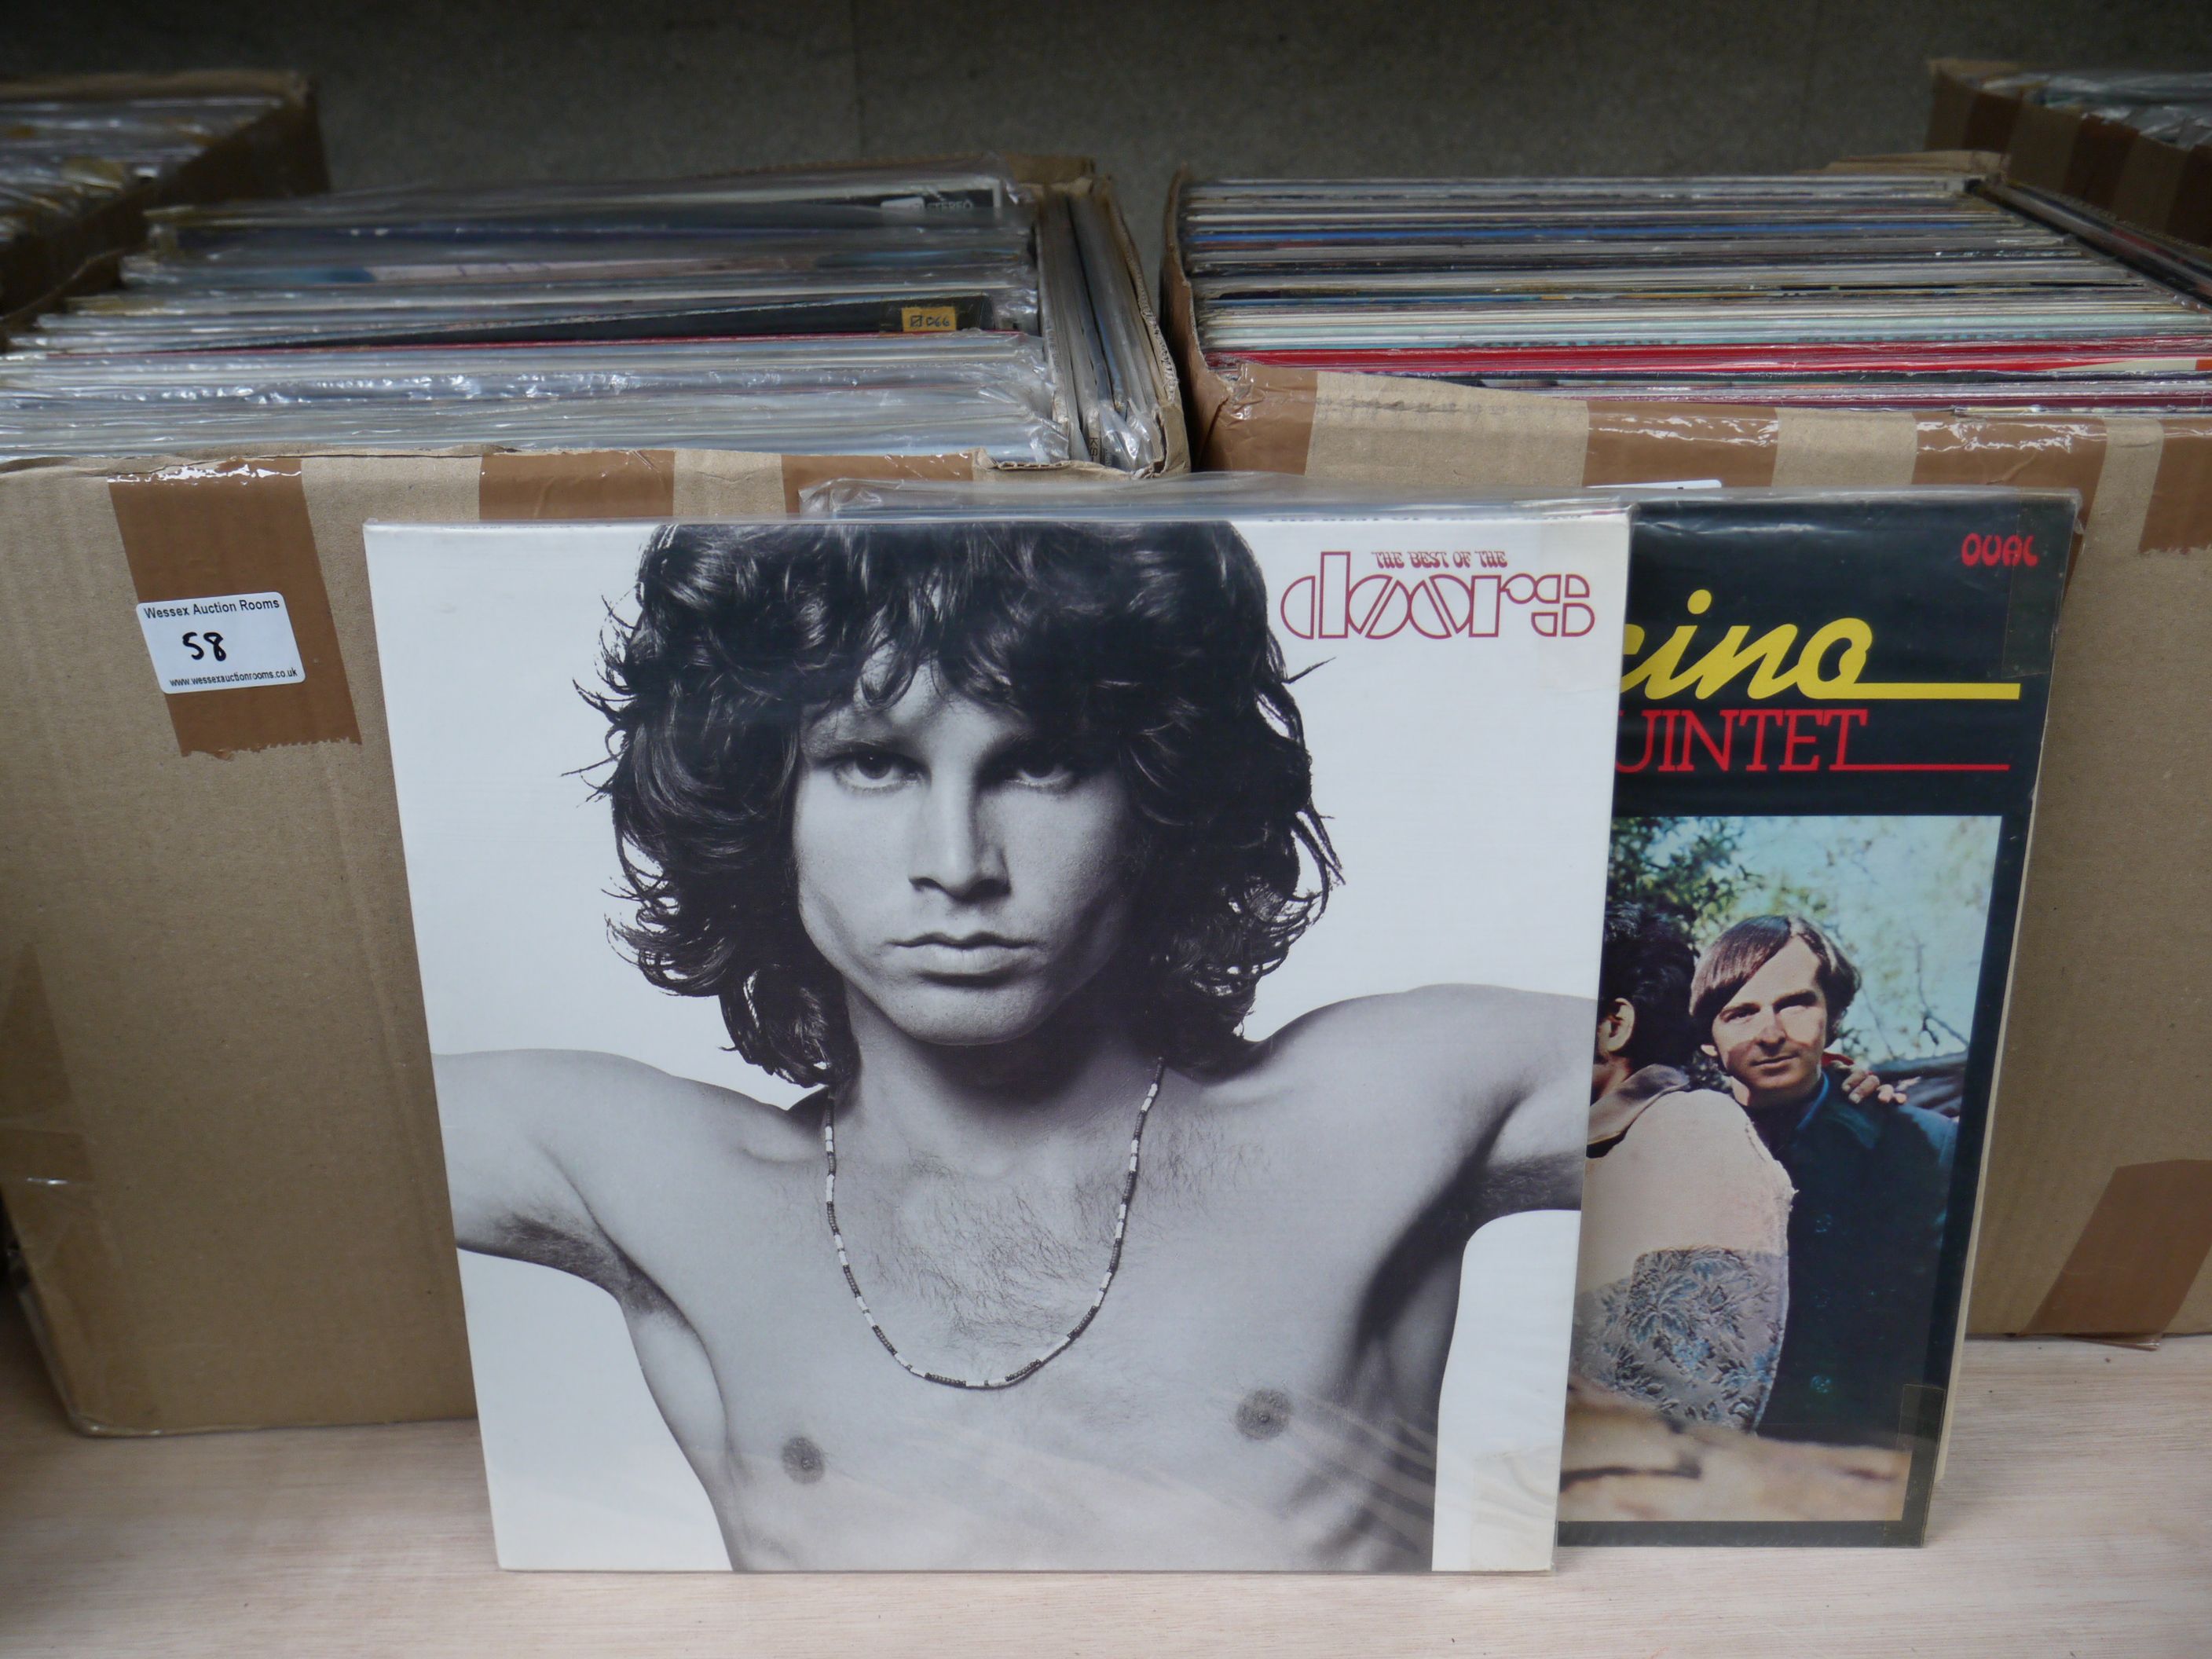 Vinyl - Around 200 LPs featuring country, easy listening, rock etc, to include The Doors, Val